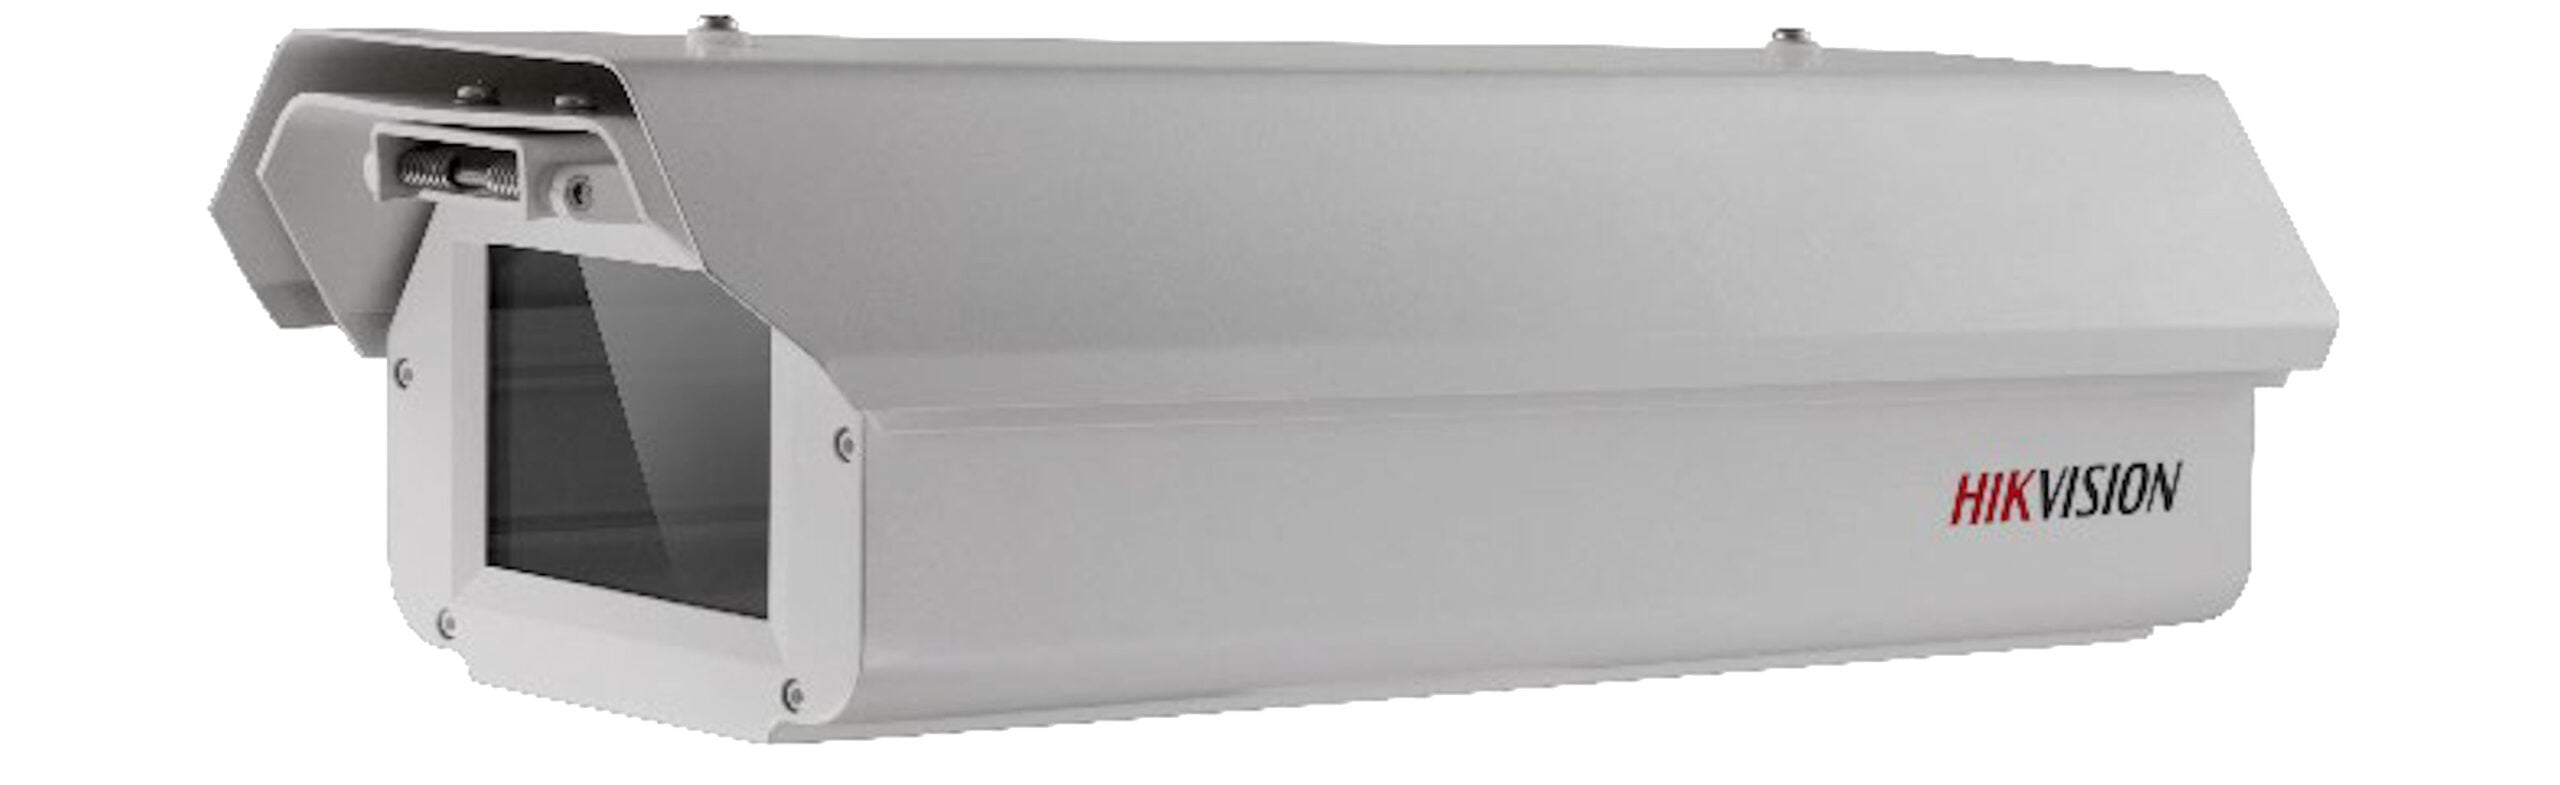 Hikvision CHB Outdoor Box Camera Housing with Wall Bracket